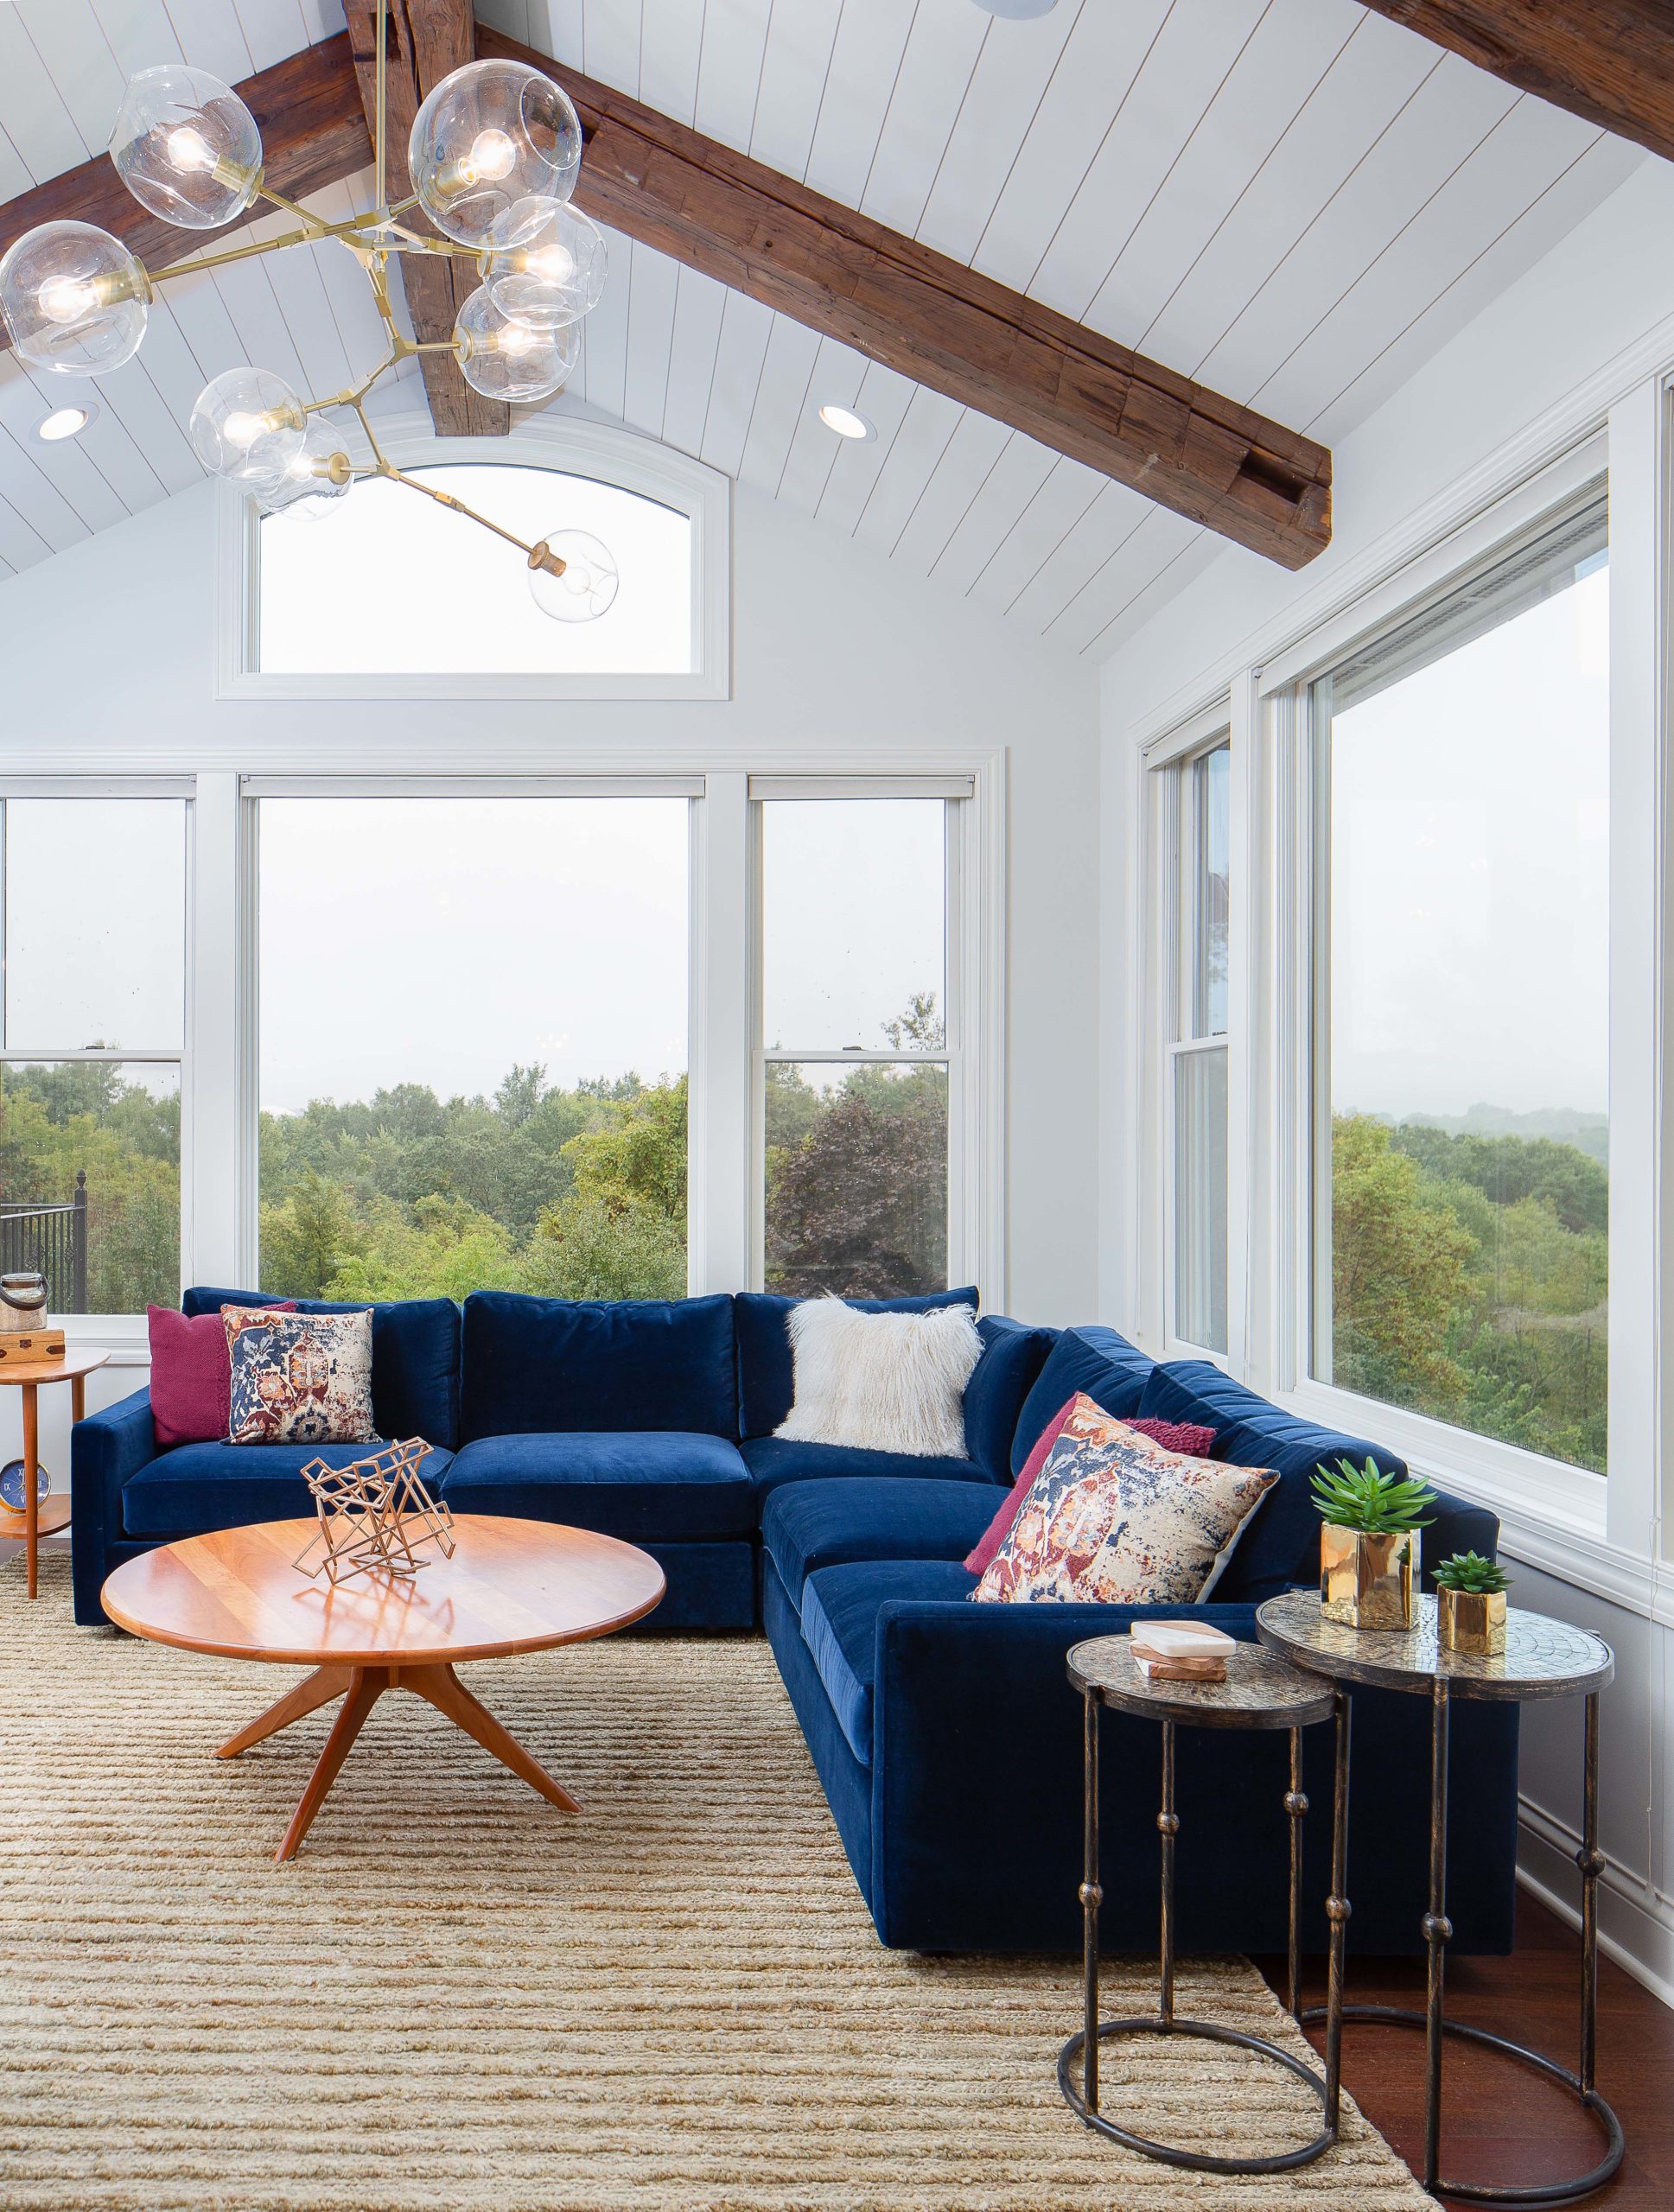 white shiplap porch furnished with a blue velvet couch, pink patterned pillows, and reclaimed wood ceiling beams